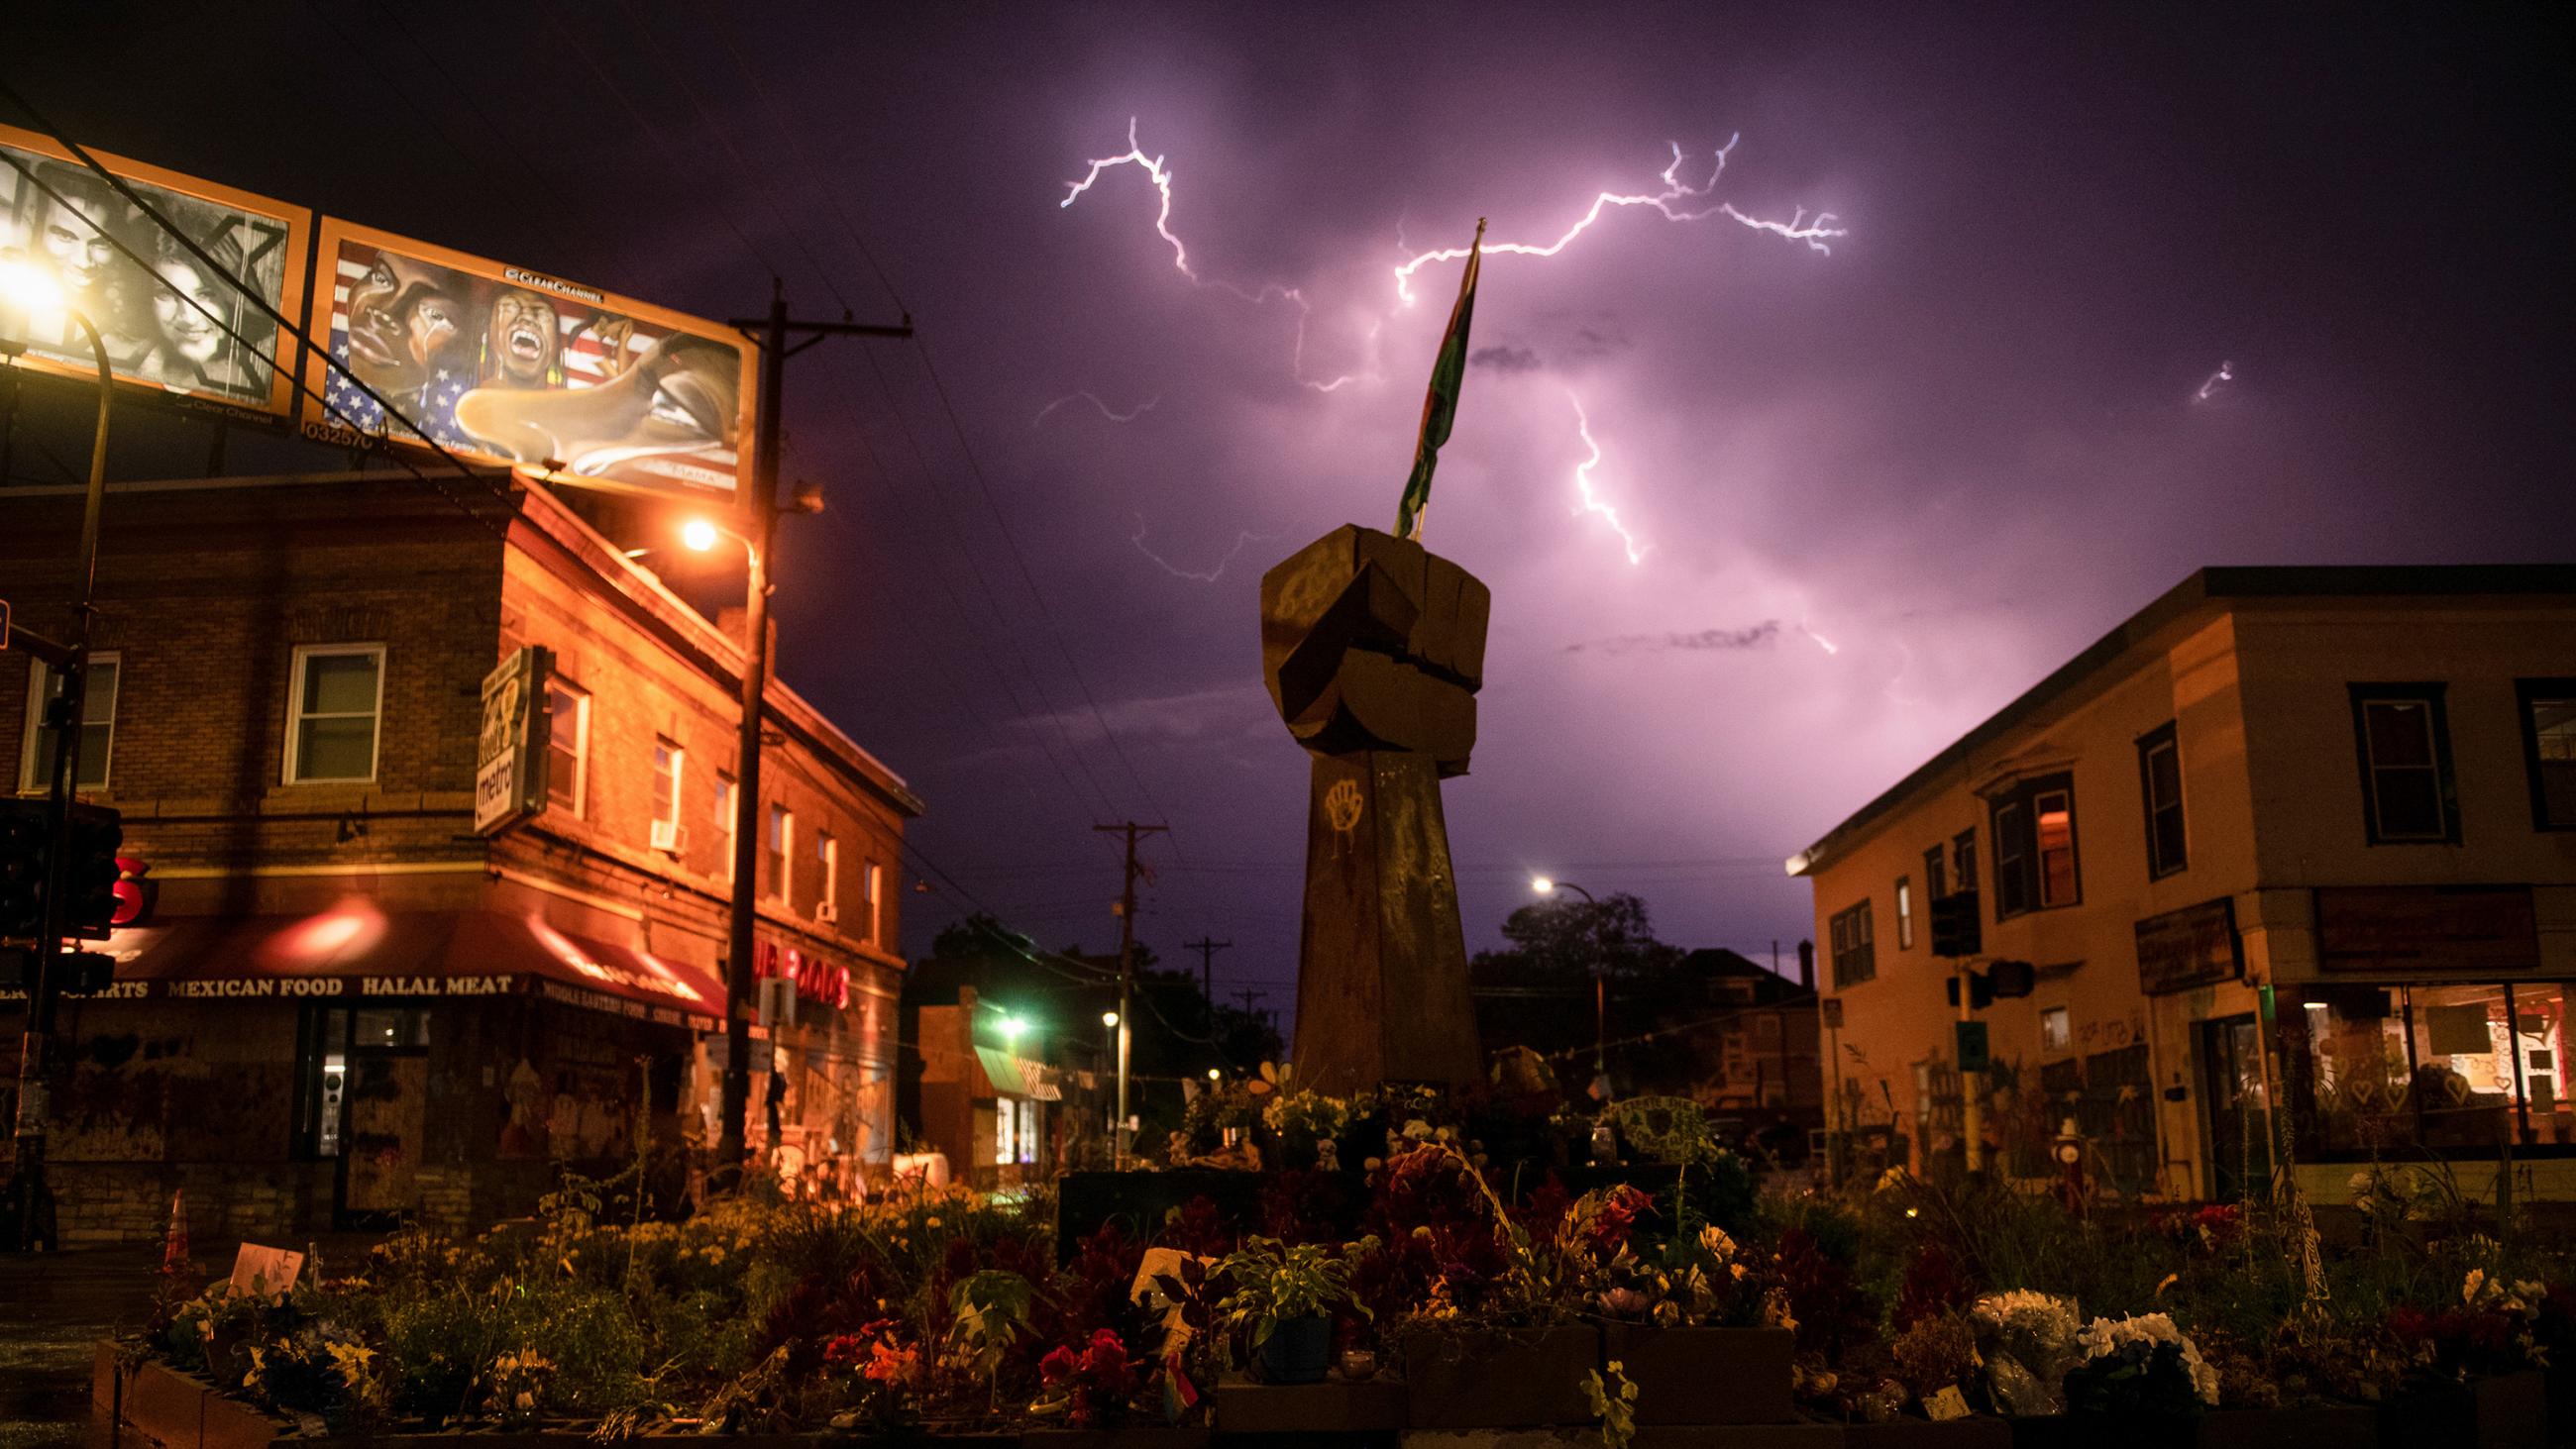 The photo shows the street where the memorial is located at night with a long-exposure photograph capturing a remarkable flash of lightning in the sky. 